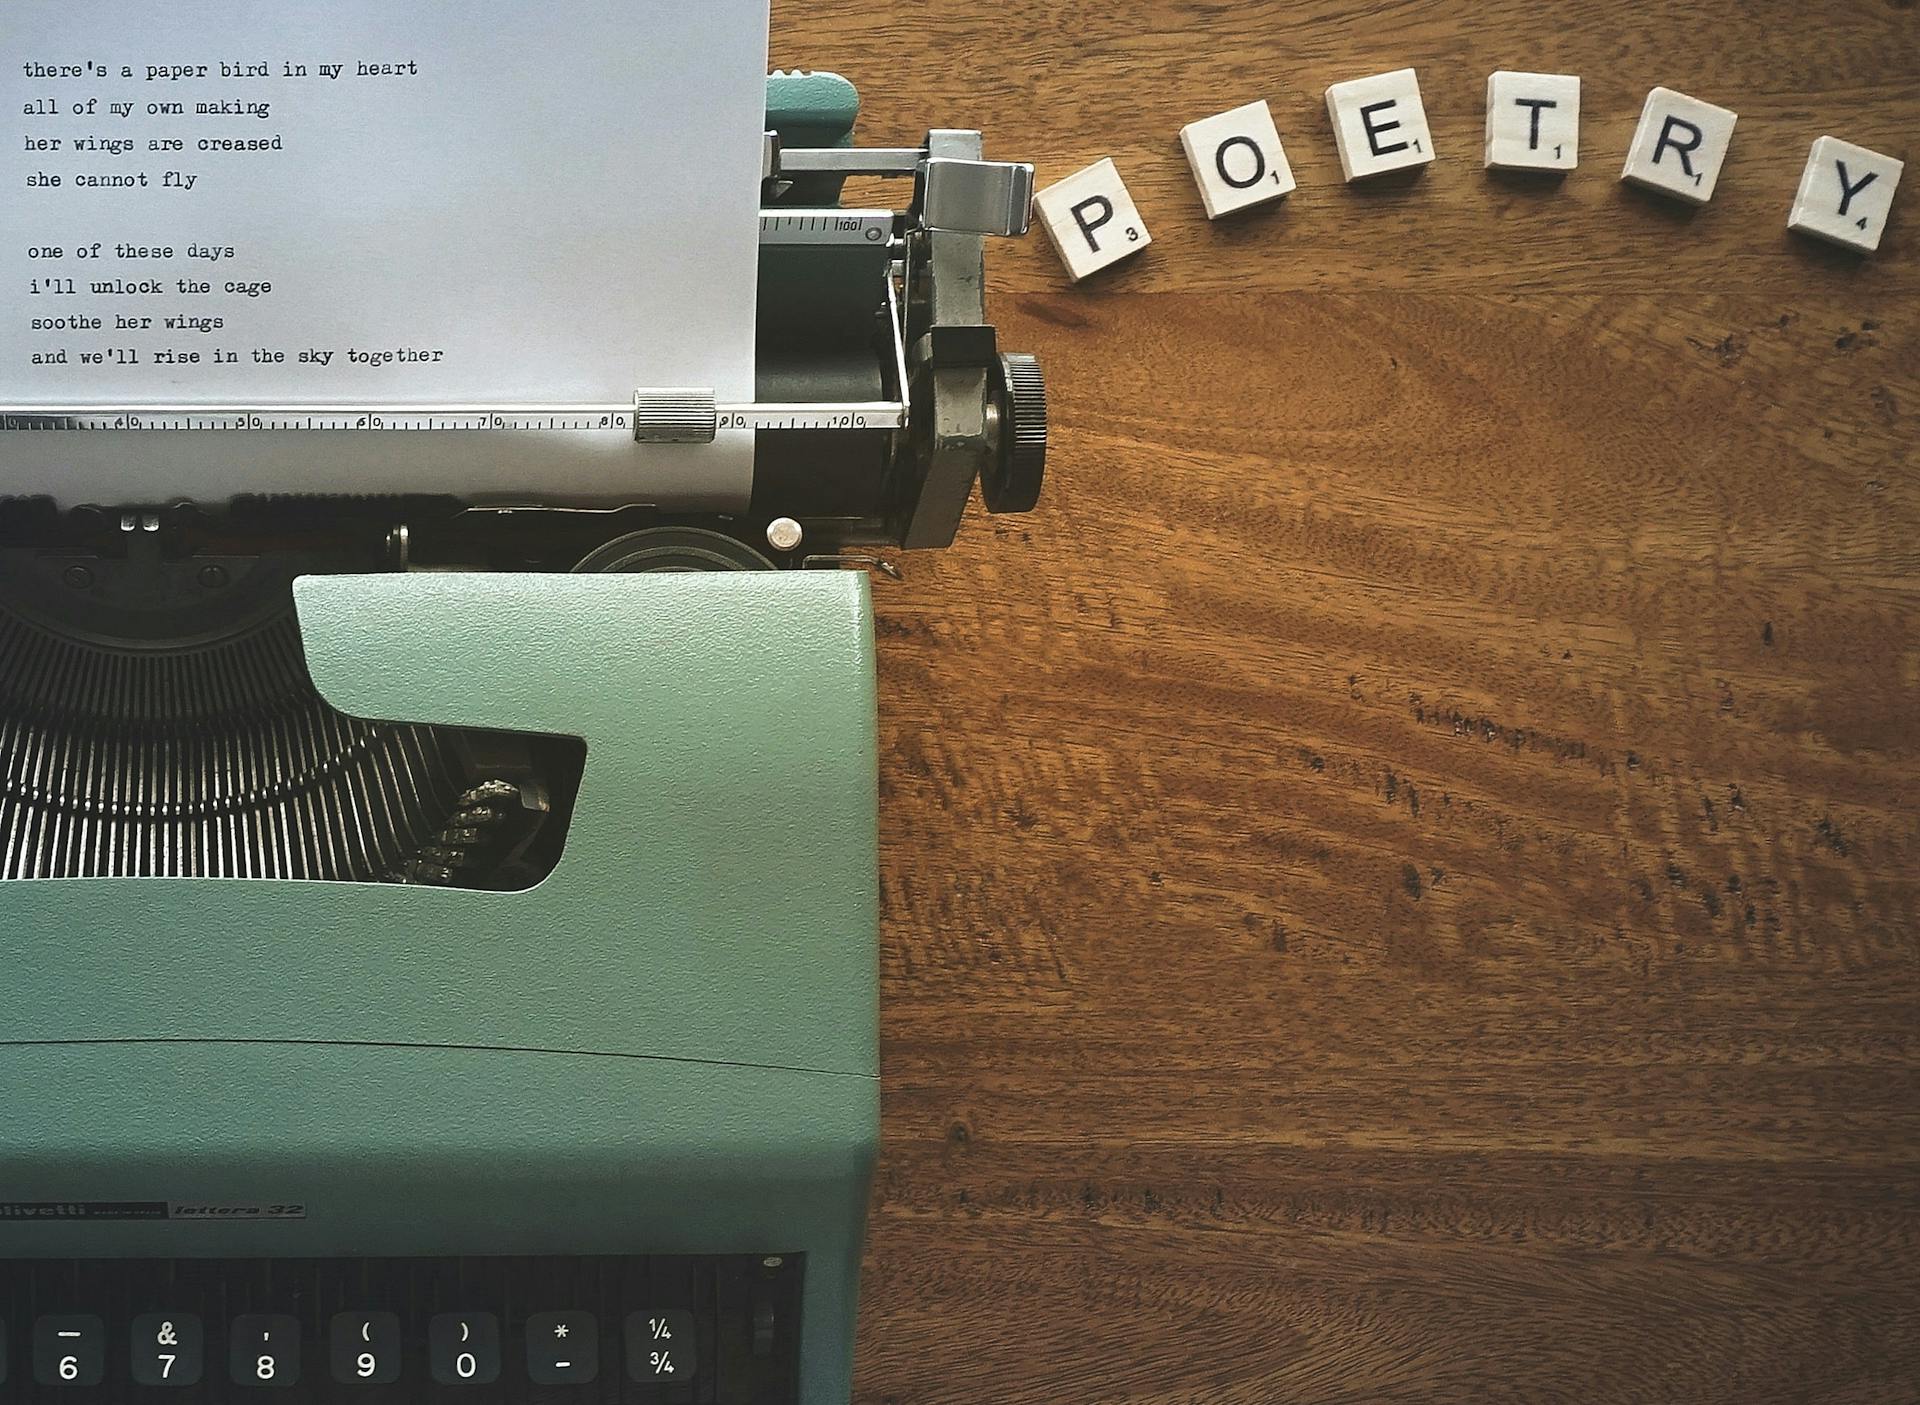 scrabble tiles that spell out the word “poetry” near a typewriter